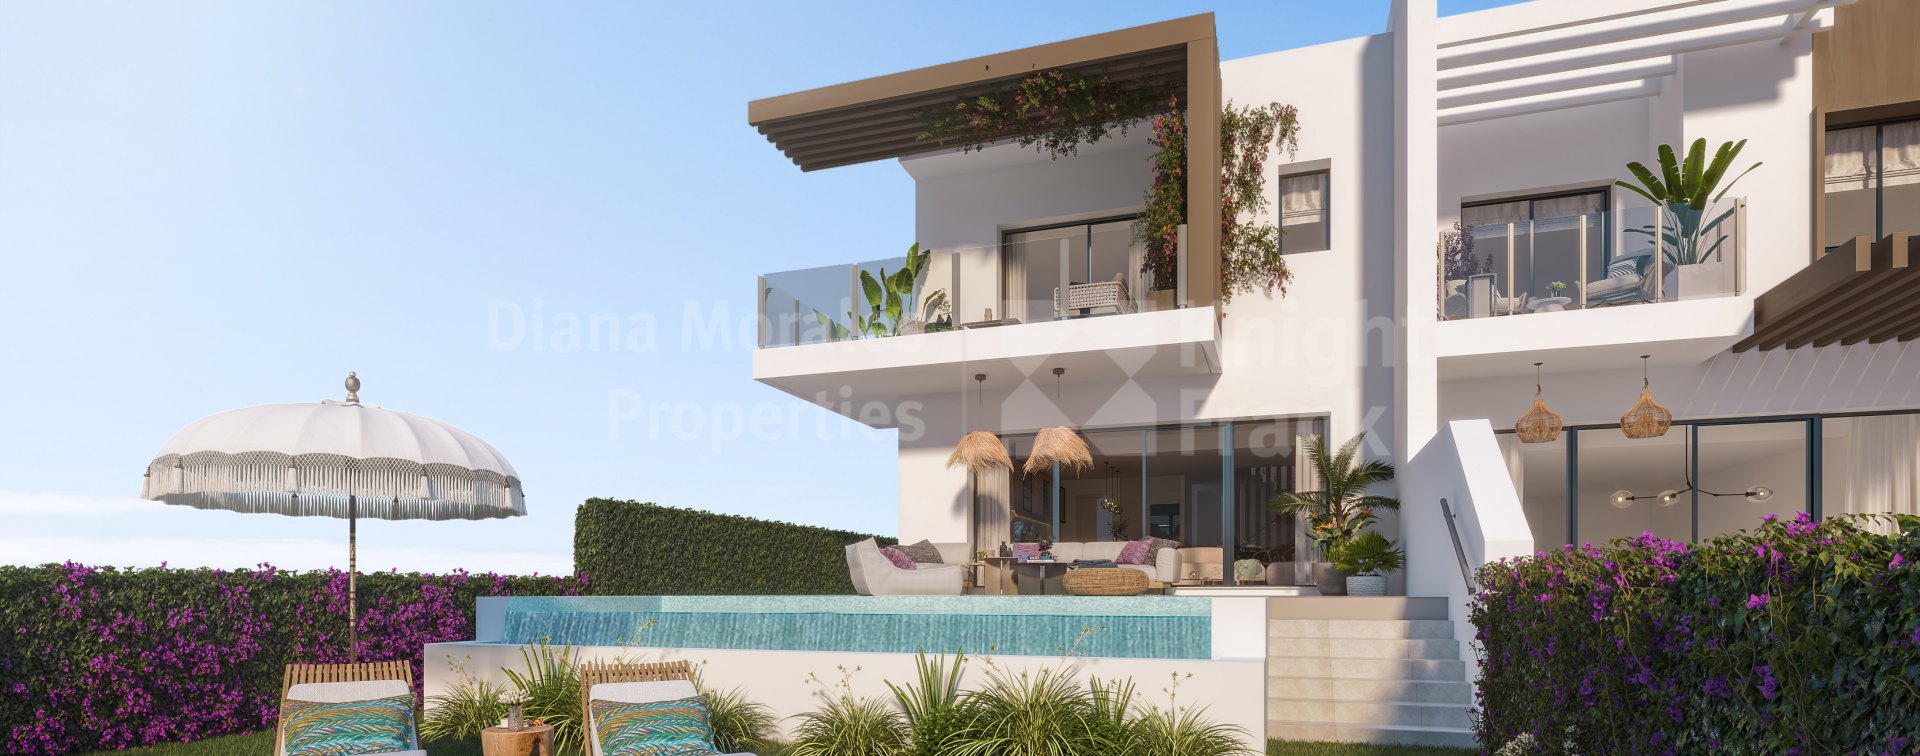 El Chaparral, New 3-bedroom townhouse next to the golf course with sea views